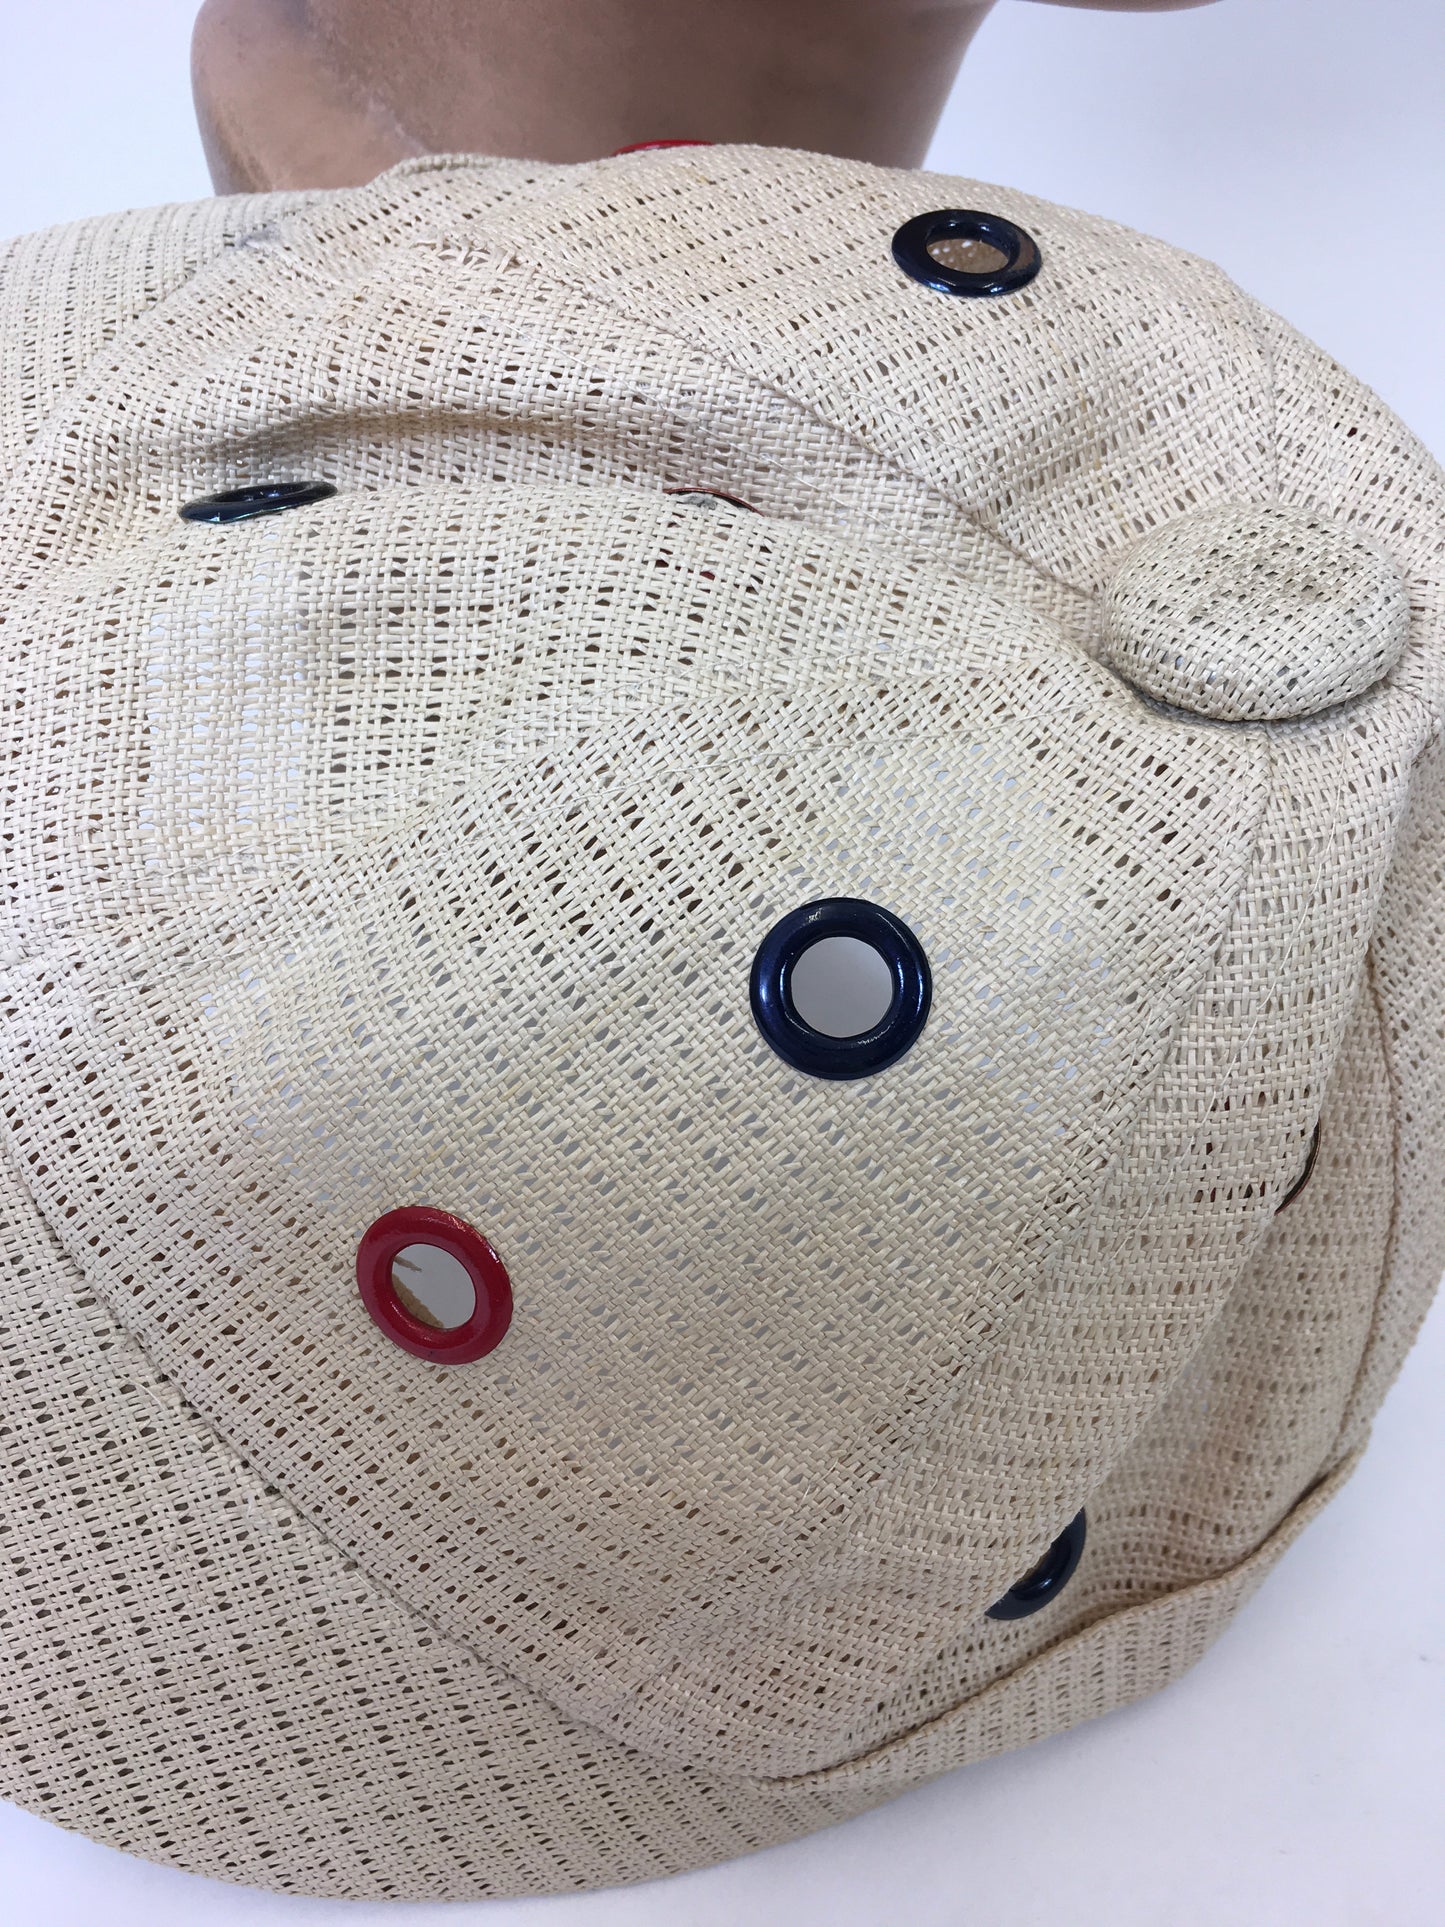 Vintage 1930's Stunning Sports Cap - In A Cream Mesh Fabric With Metal Eyelets in Blue & Red